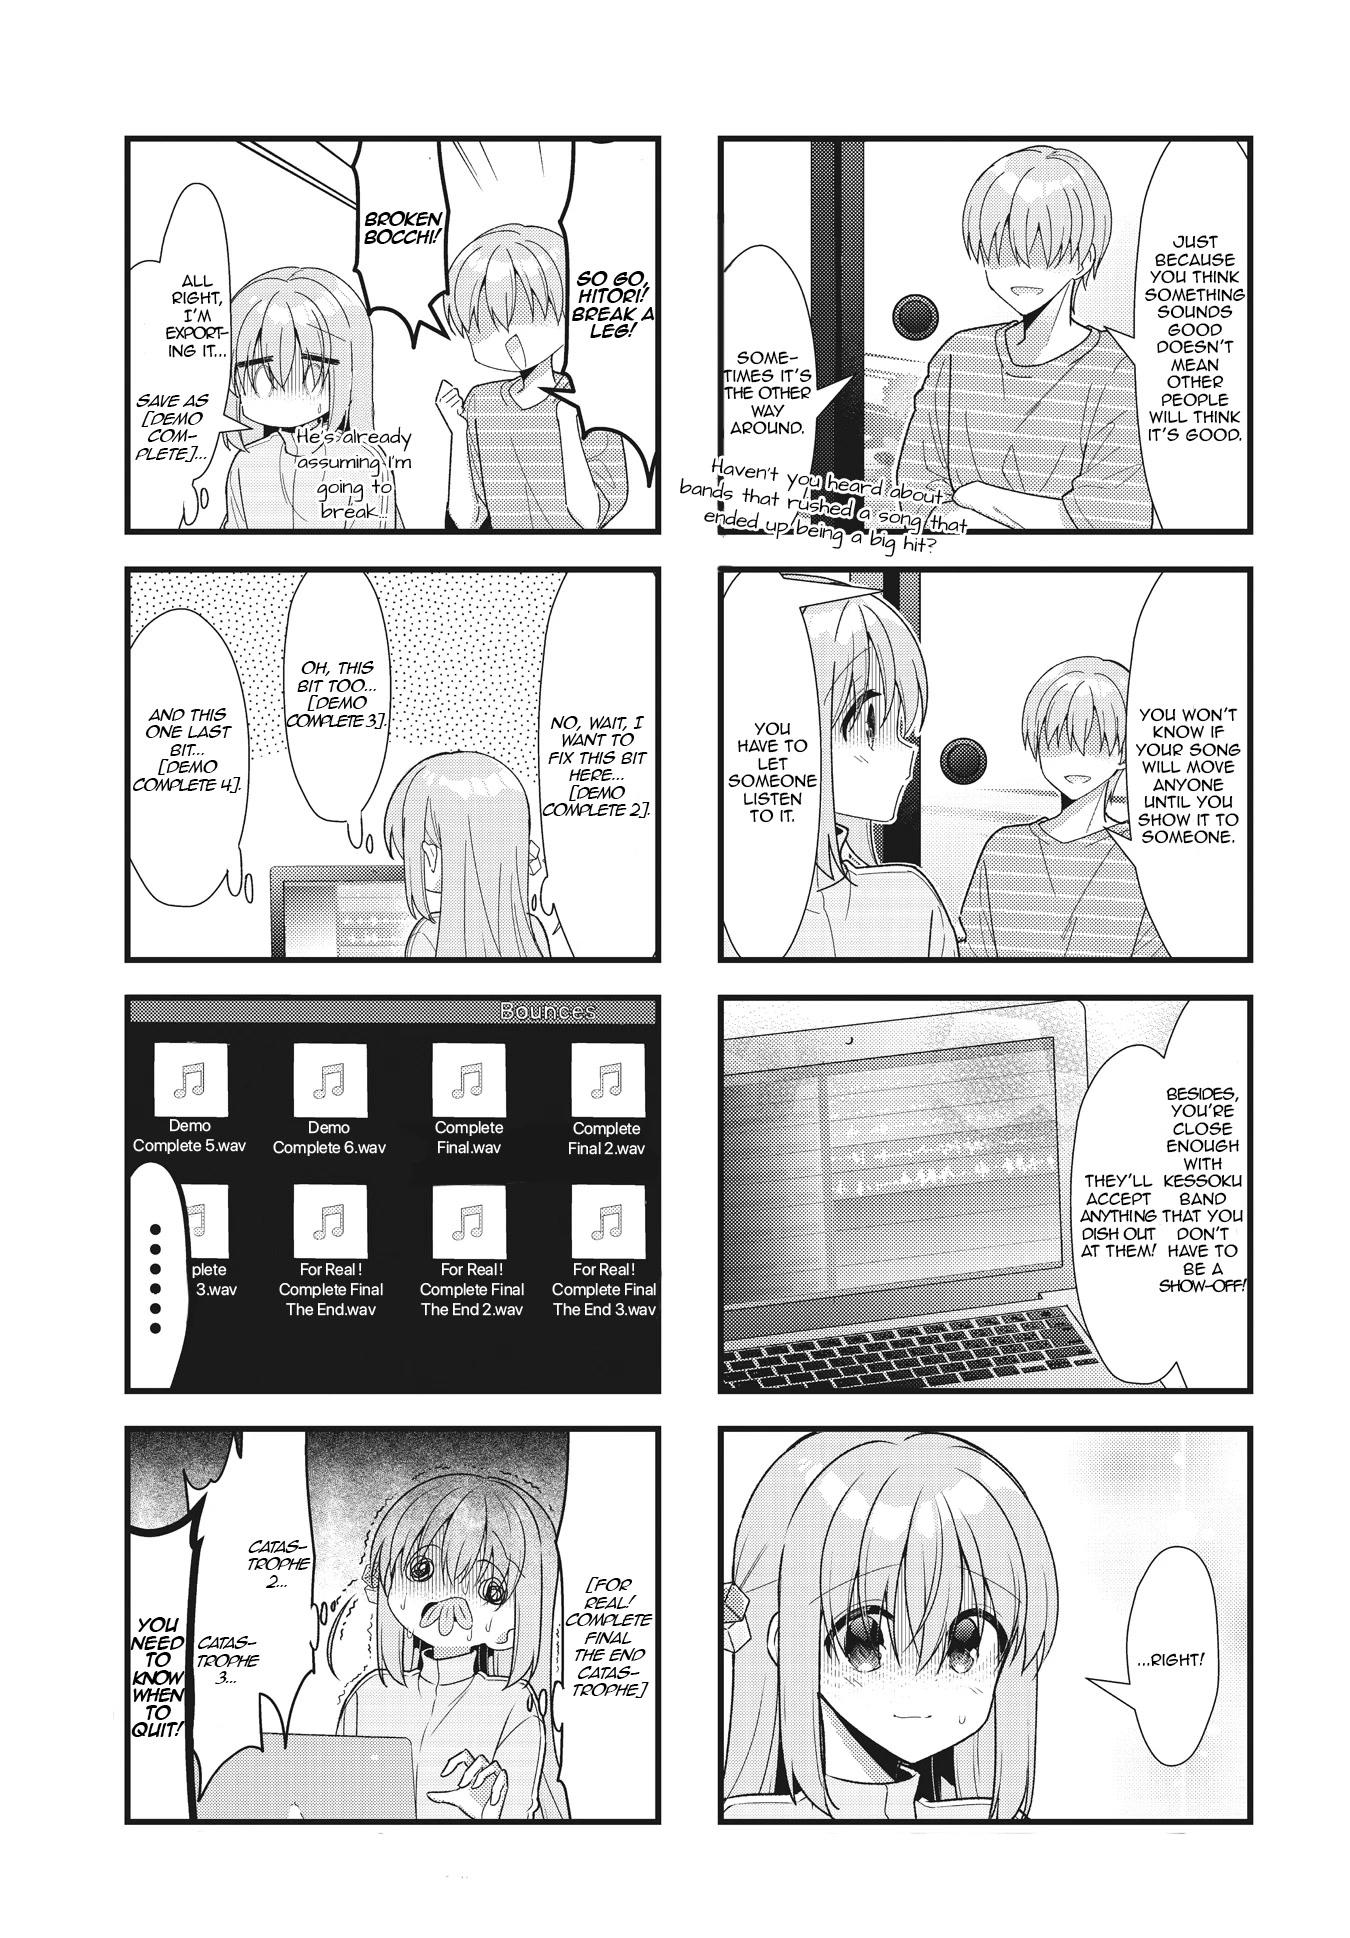 Bocchi The Rock Chapter 51 page 14 - 